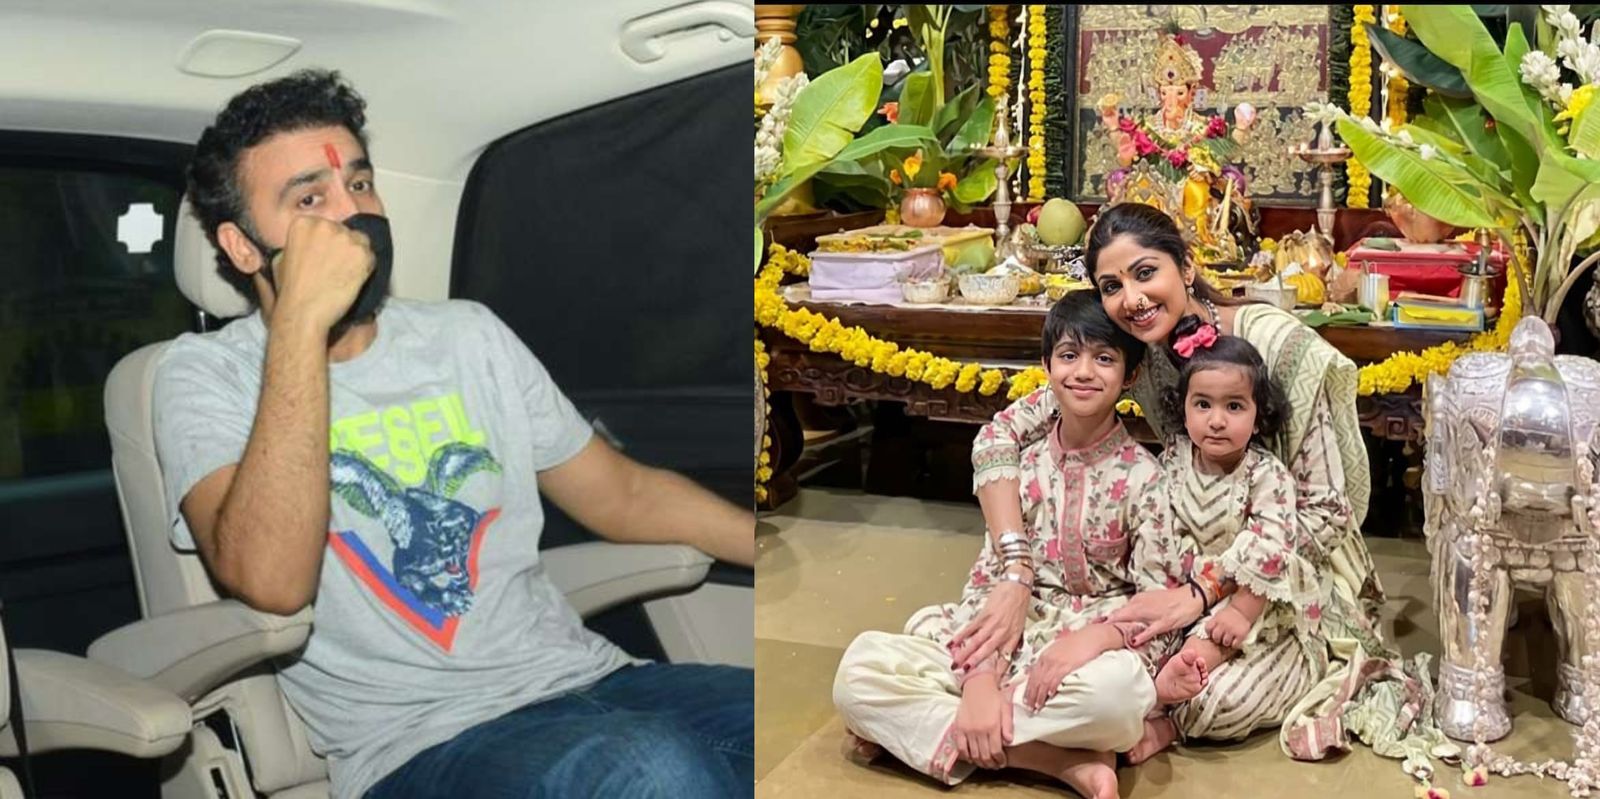 Shilpa Shetty pens note about ‘rising’ after Raj Kundra’s bail; son Viaan calls ‘trouble’ as small as Lord Ganesha’s mouse